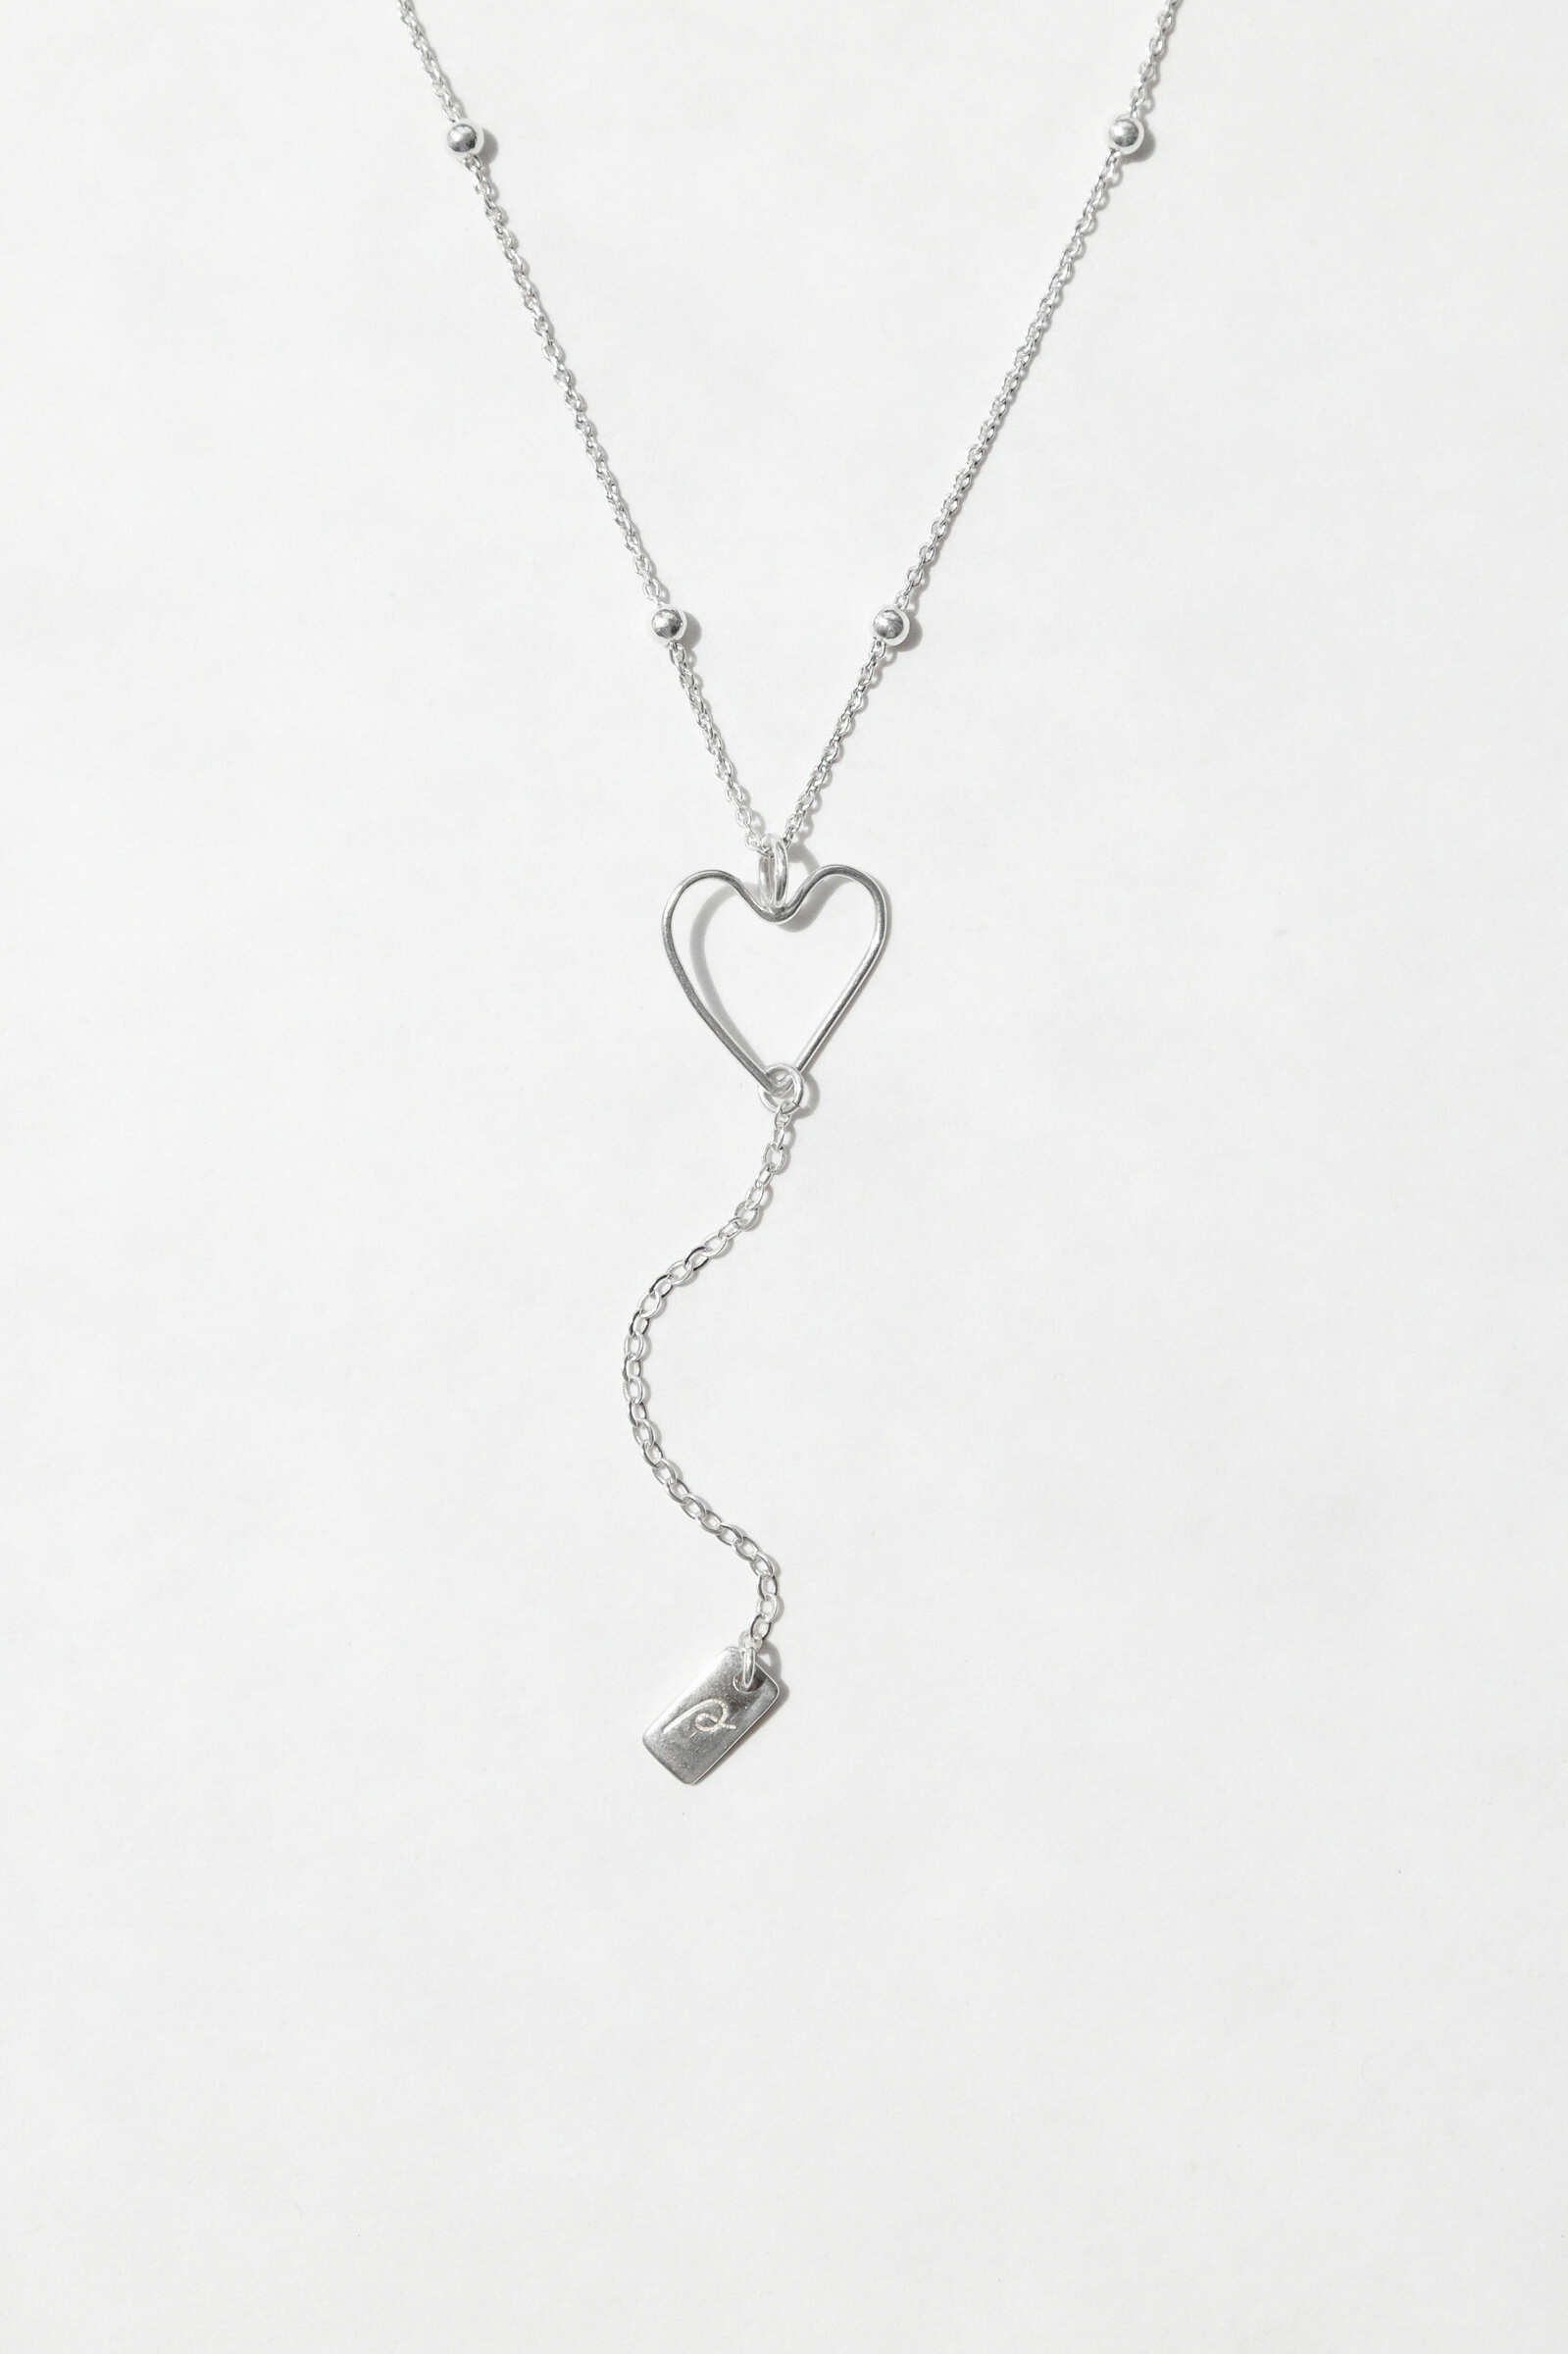 Lover's Name Tag Necklace1.jpg